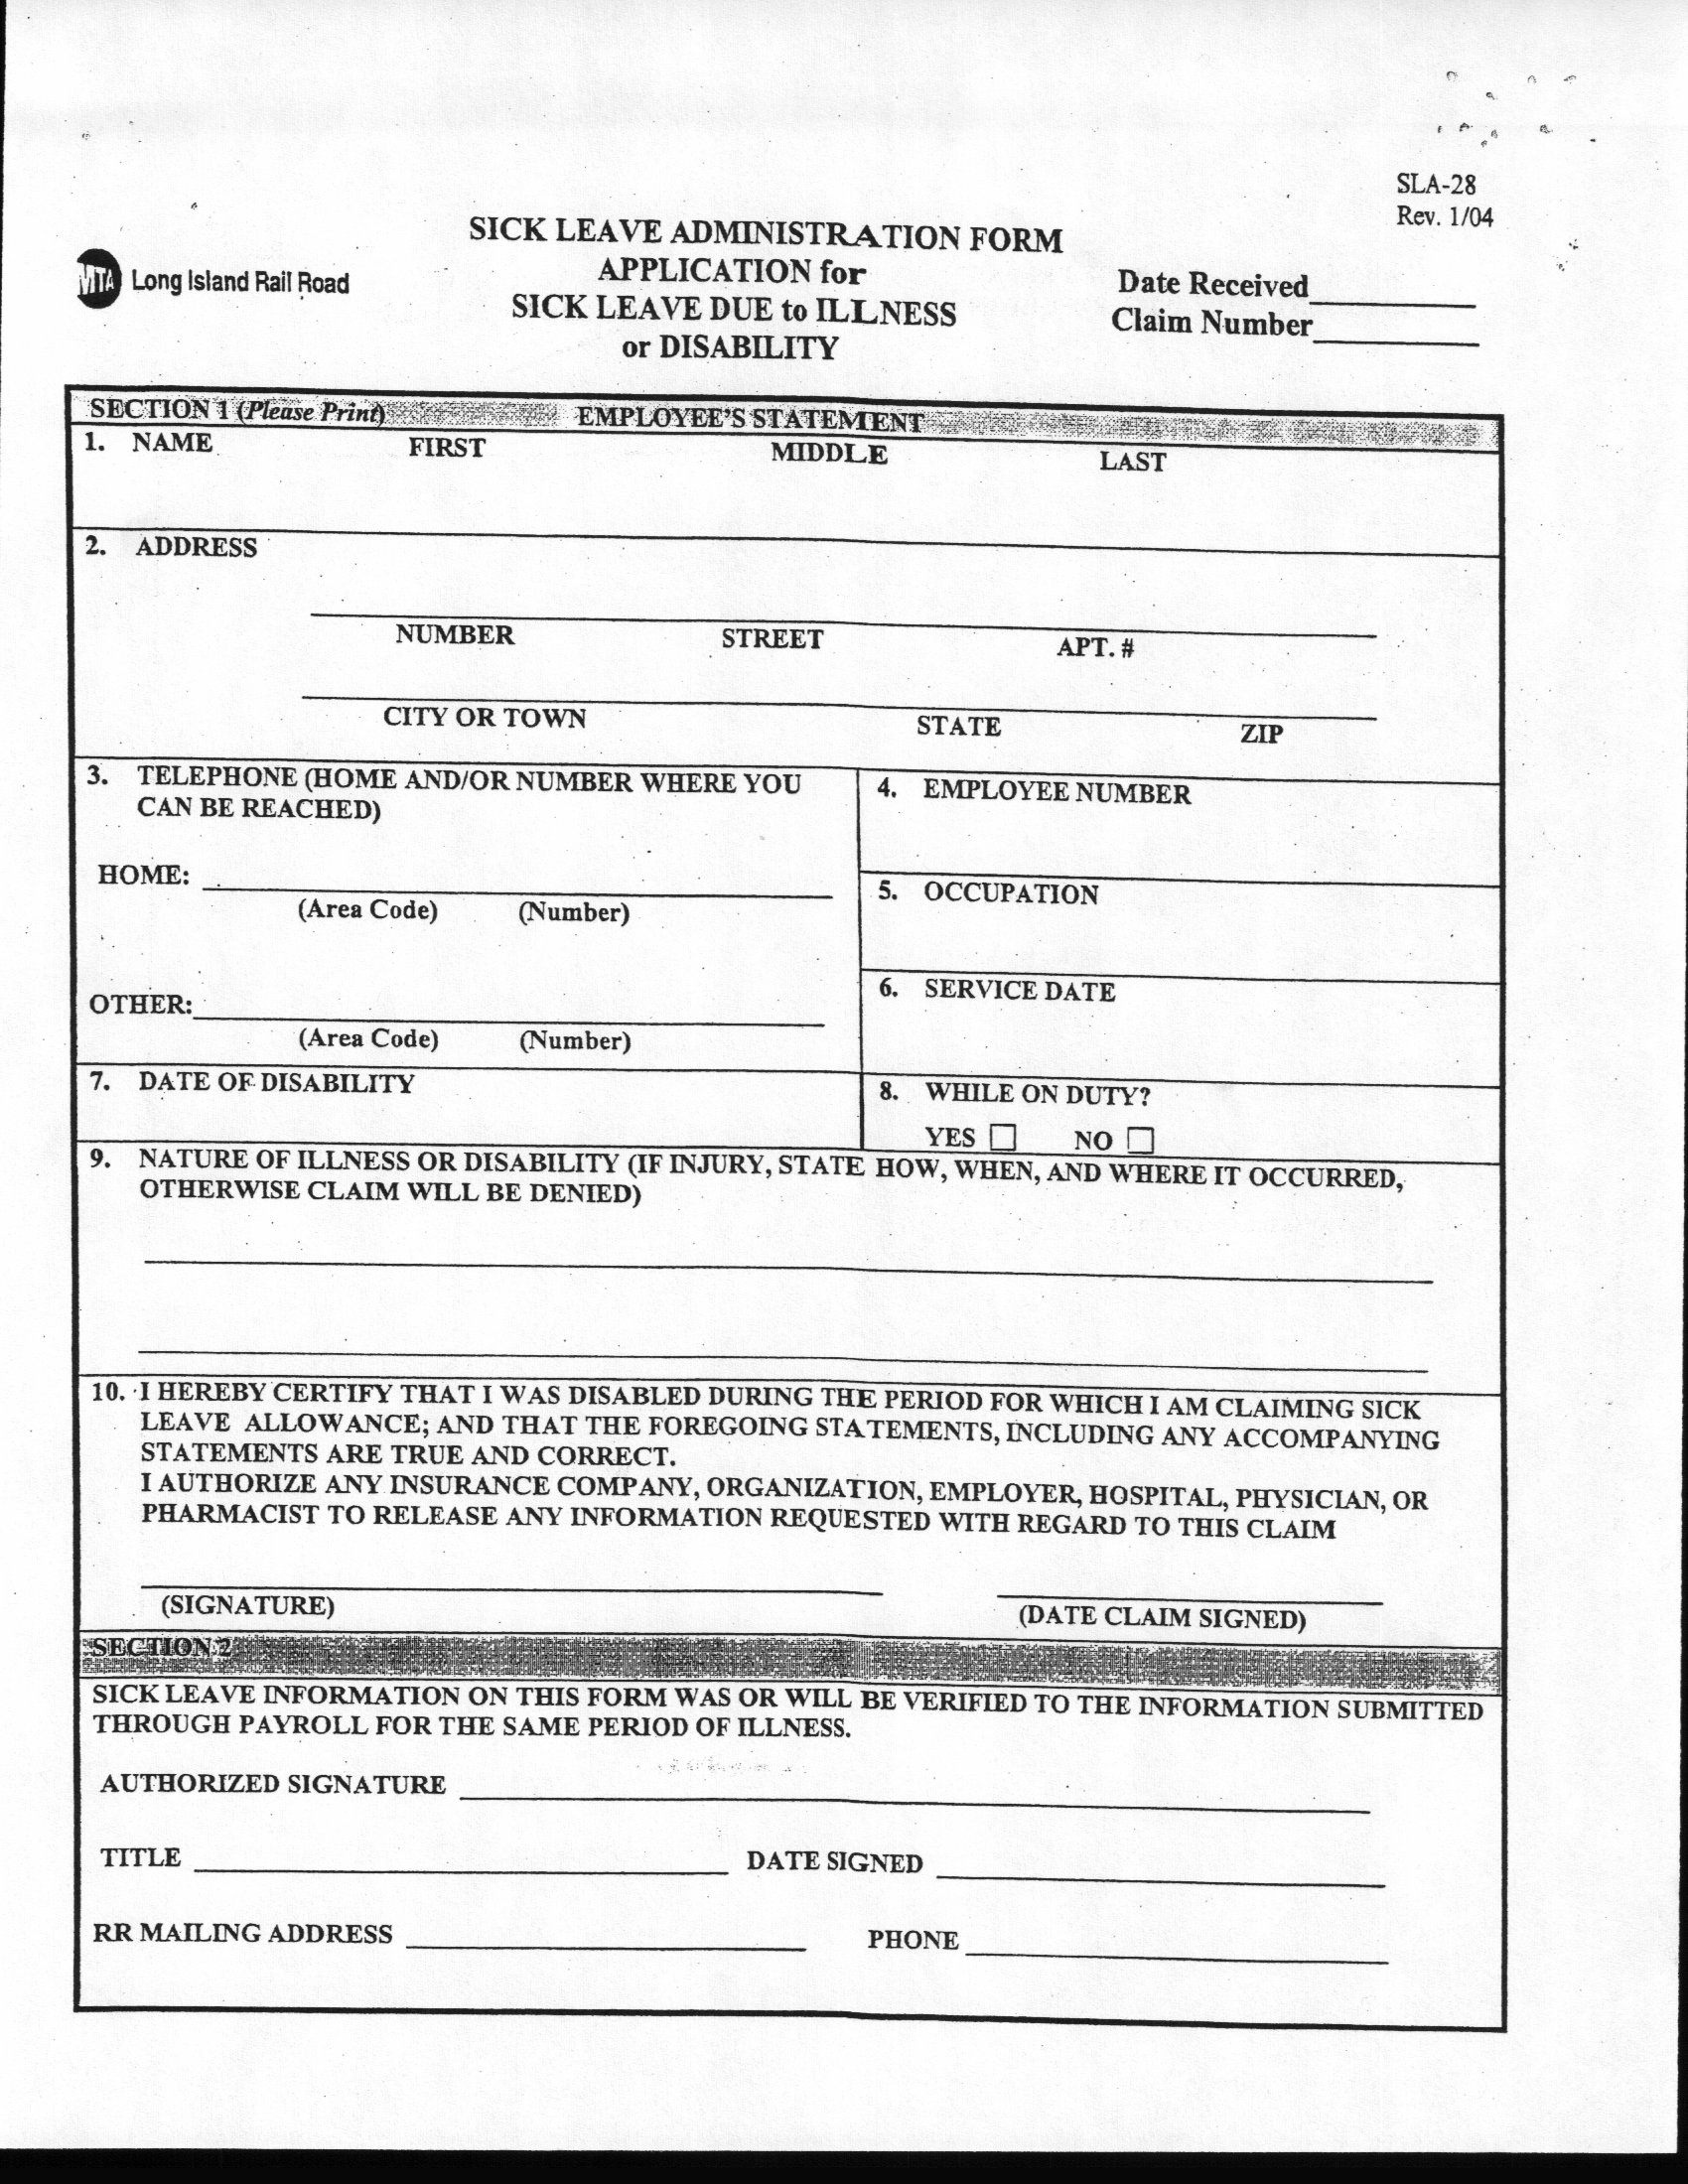 leave request form sample